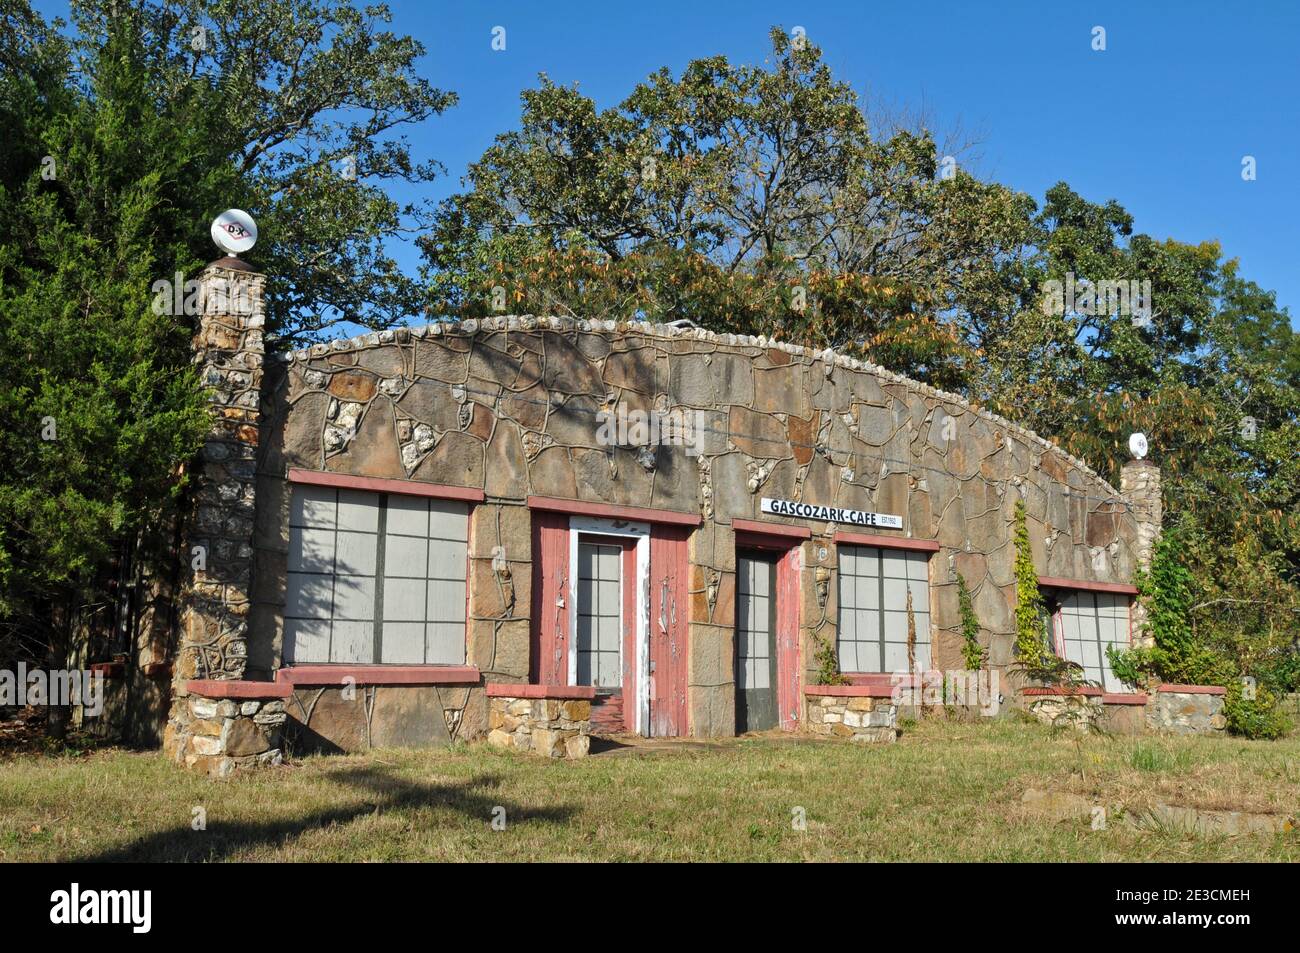 Now abandoned, the former Gascozark cafe and service station was built in the 1930s and served Route 66 travelers. Stock Photo